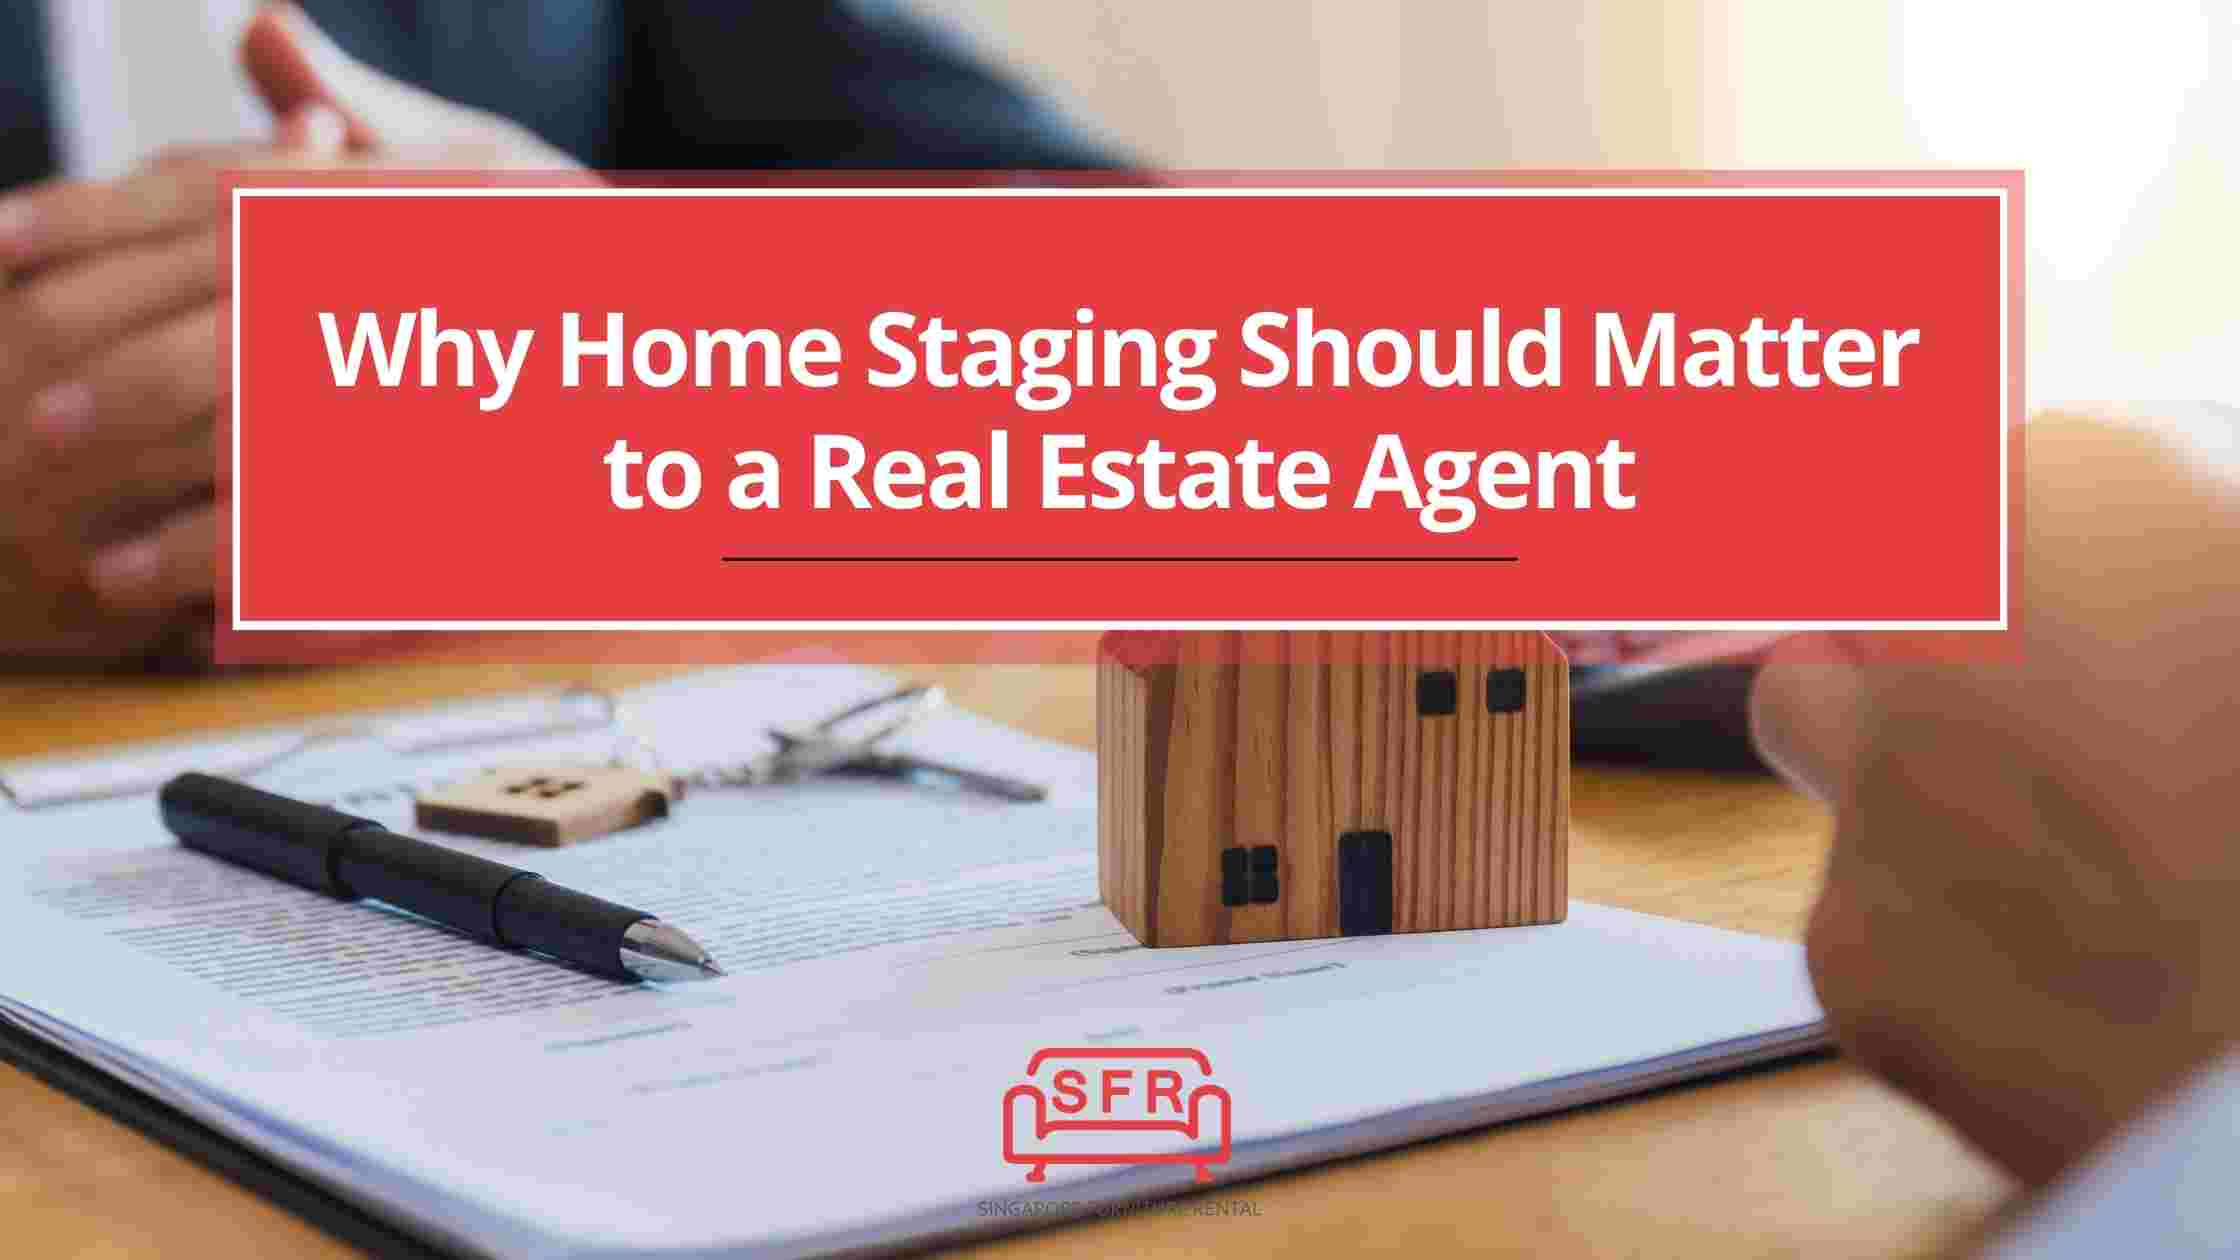 Why Home Staging Should Matter to a Real Estate Agent